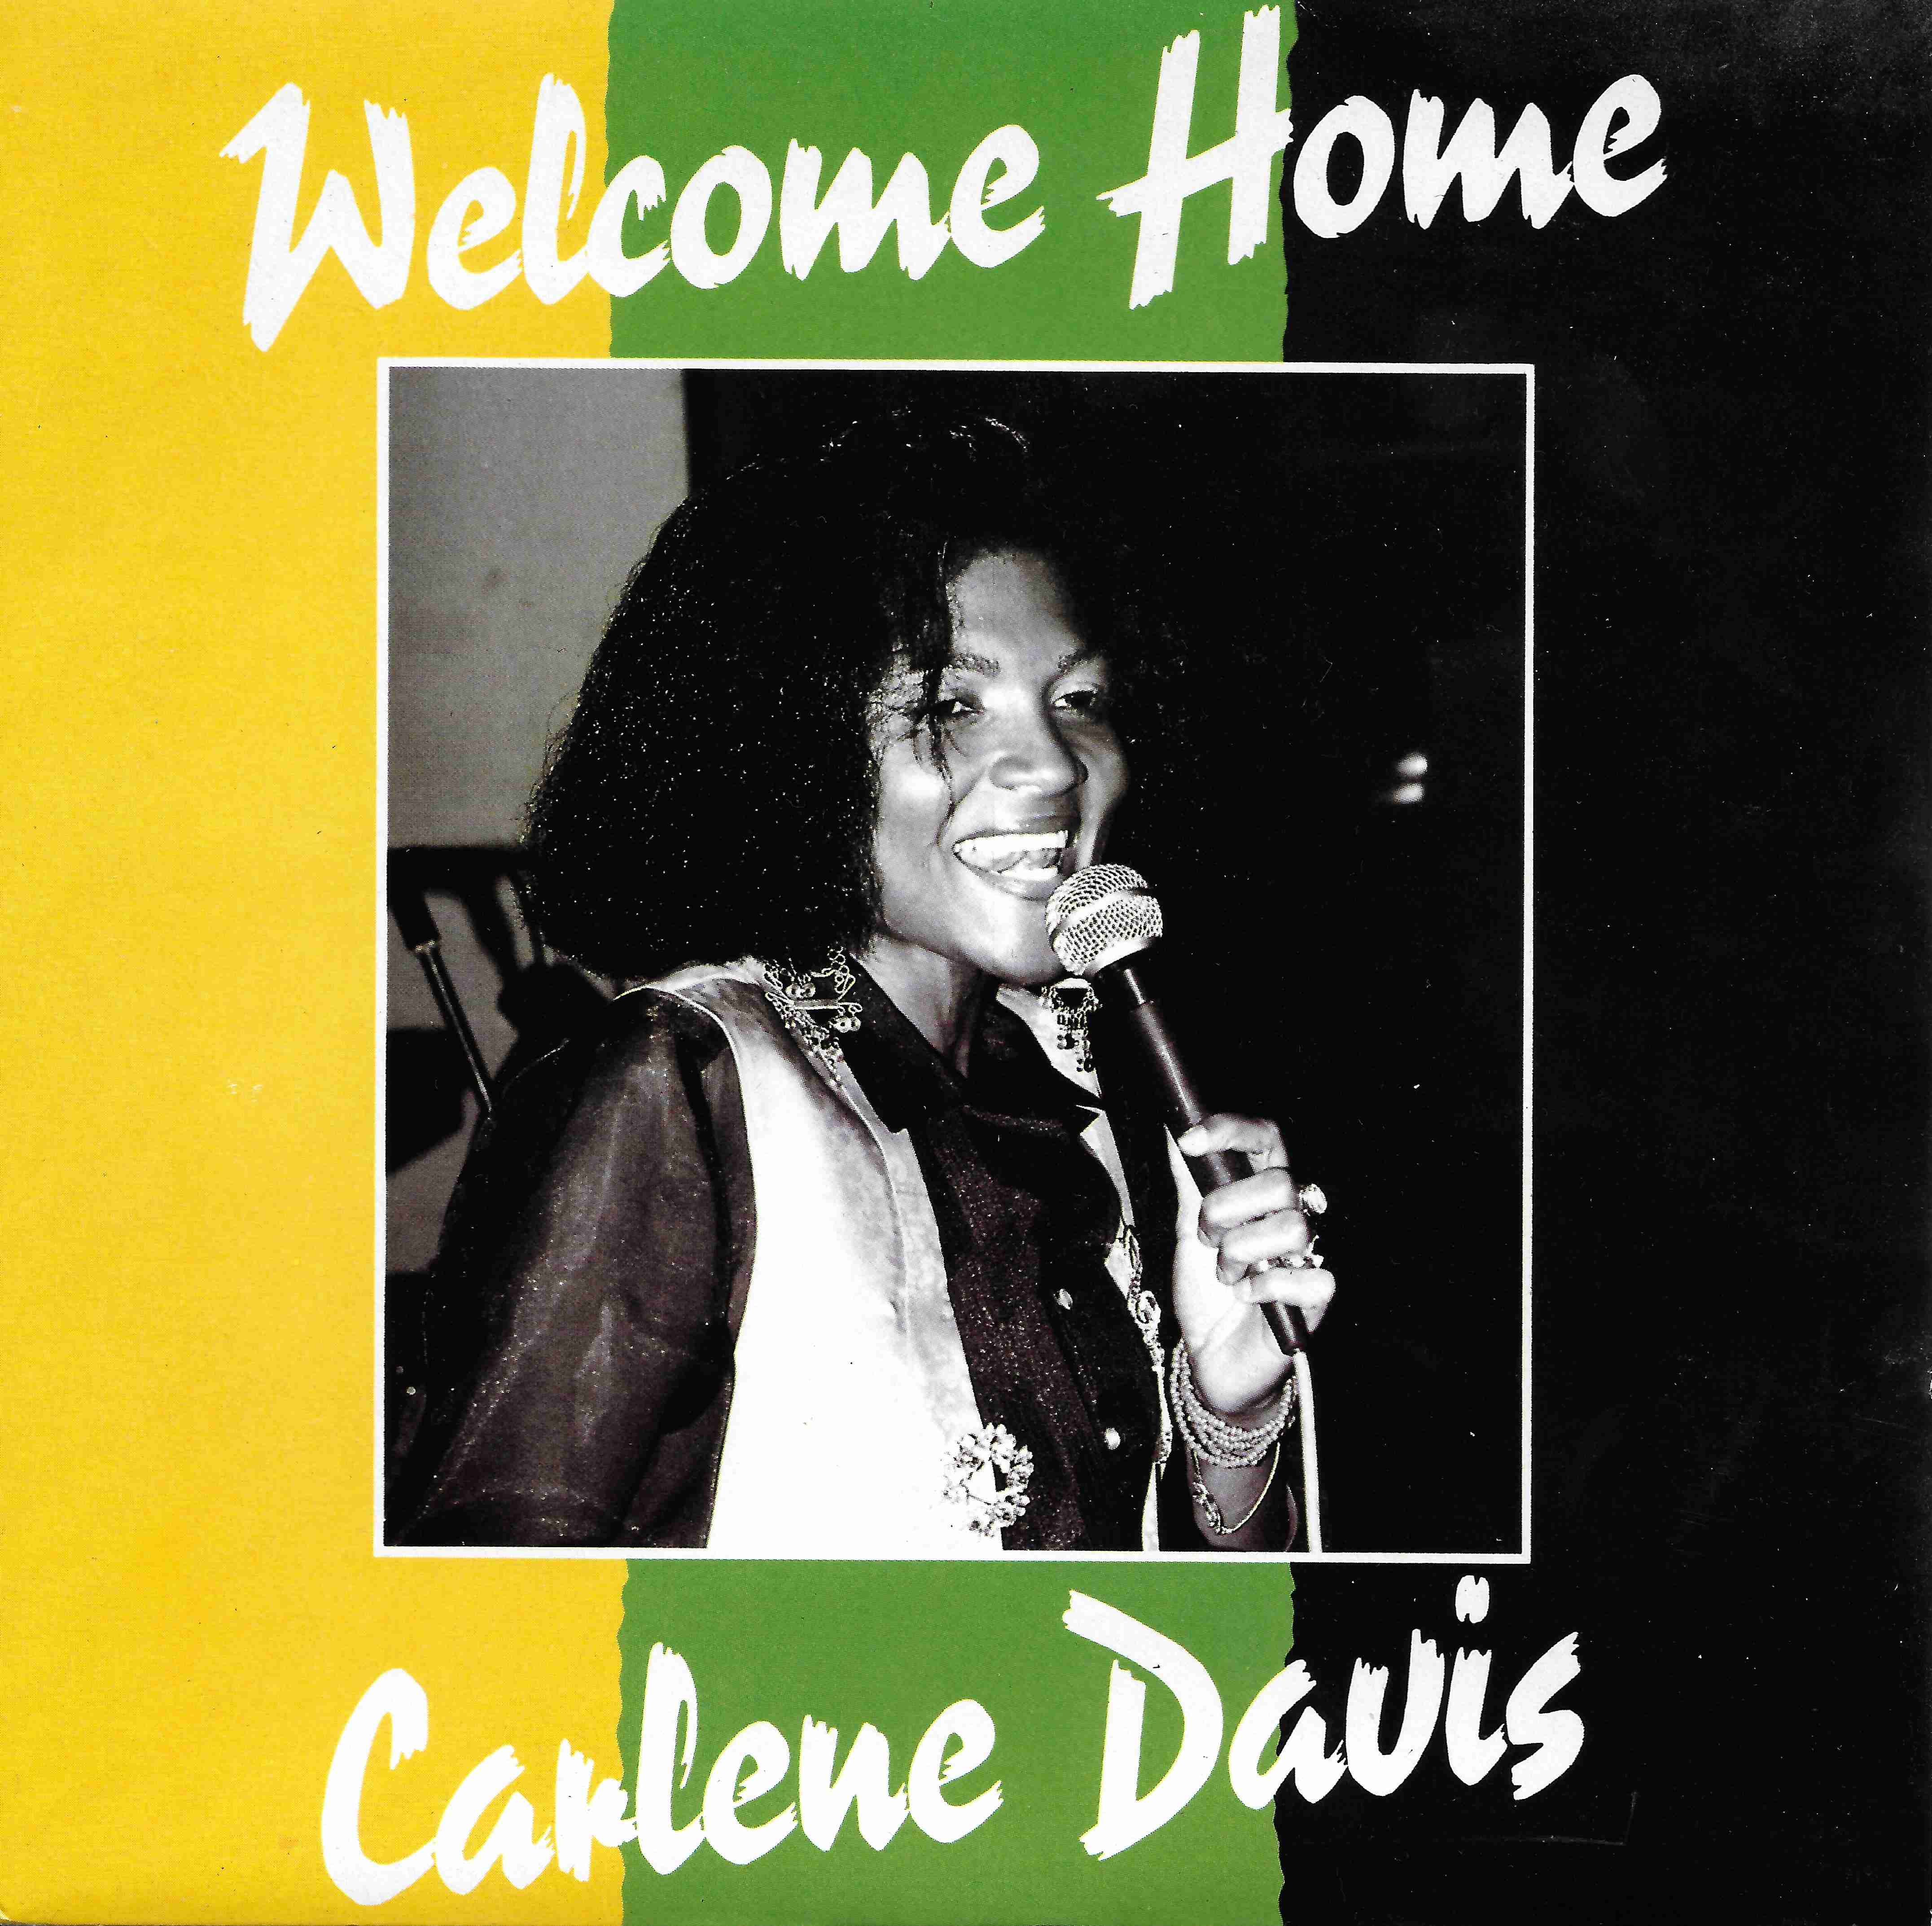 Picture of RESL 244 Welcome home by artist Carlene Davis from the BBC singles - Records and Tapes library